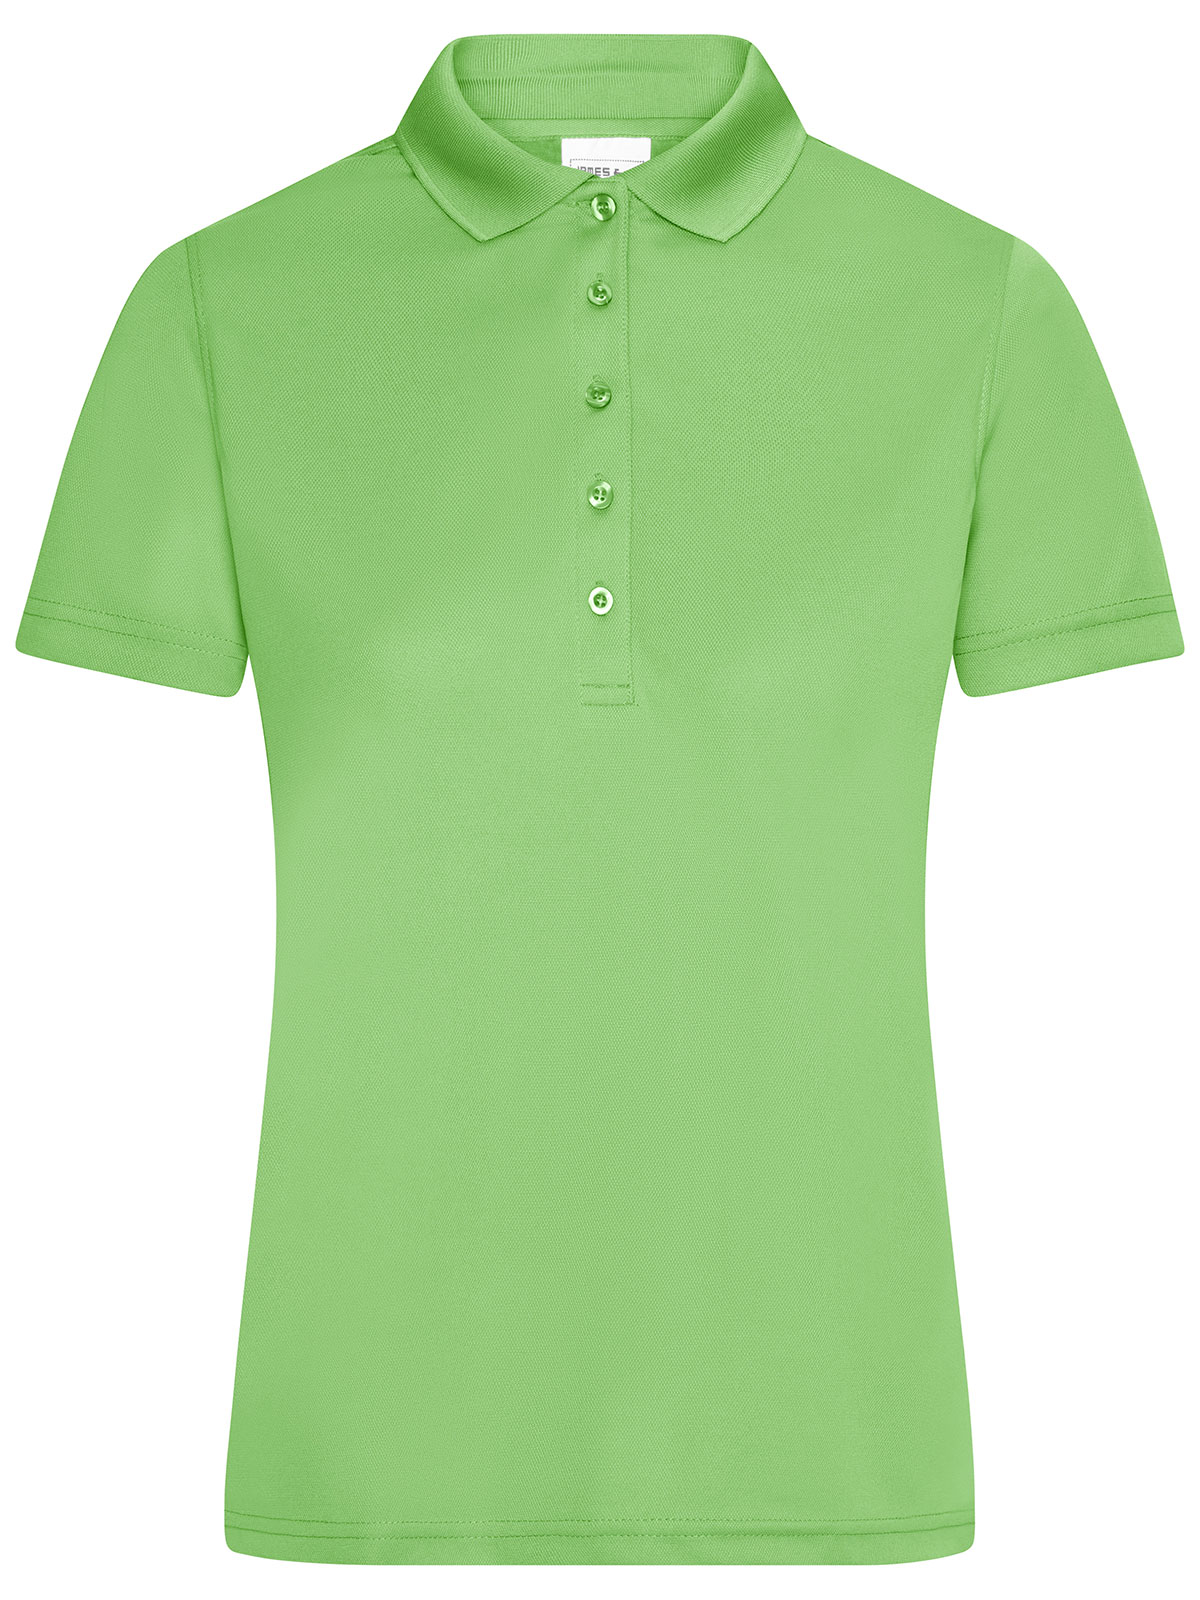 ladies-active-polo-lime-green.webp